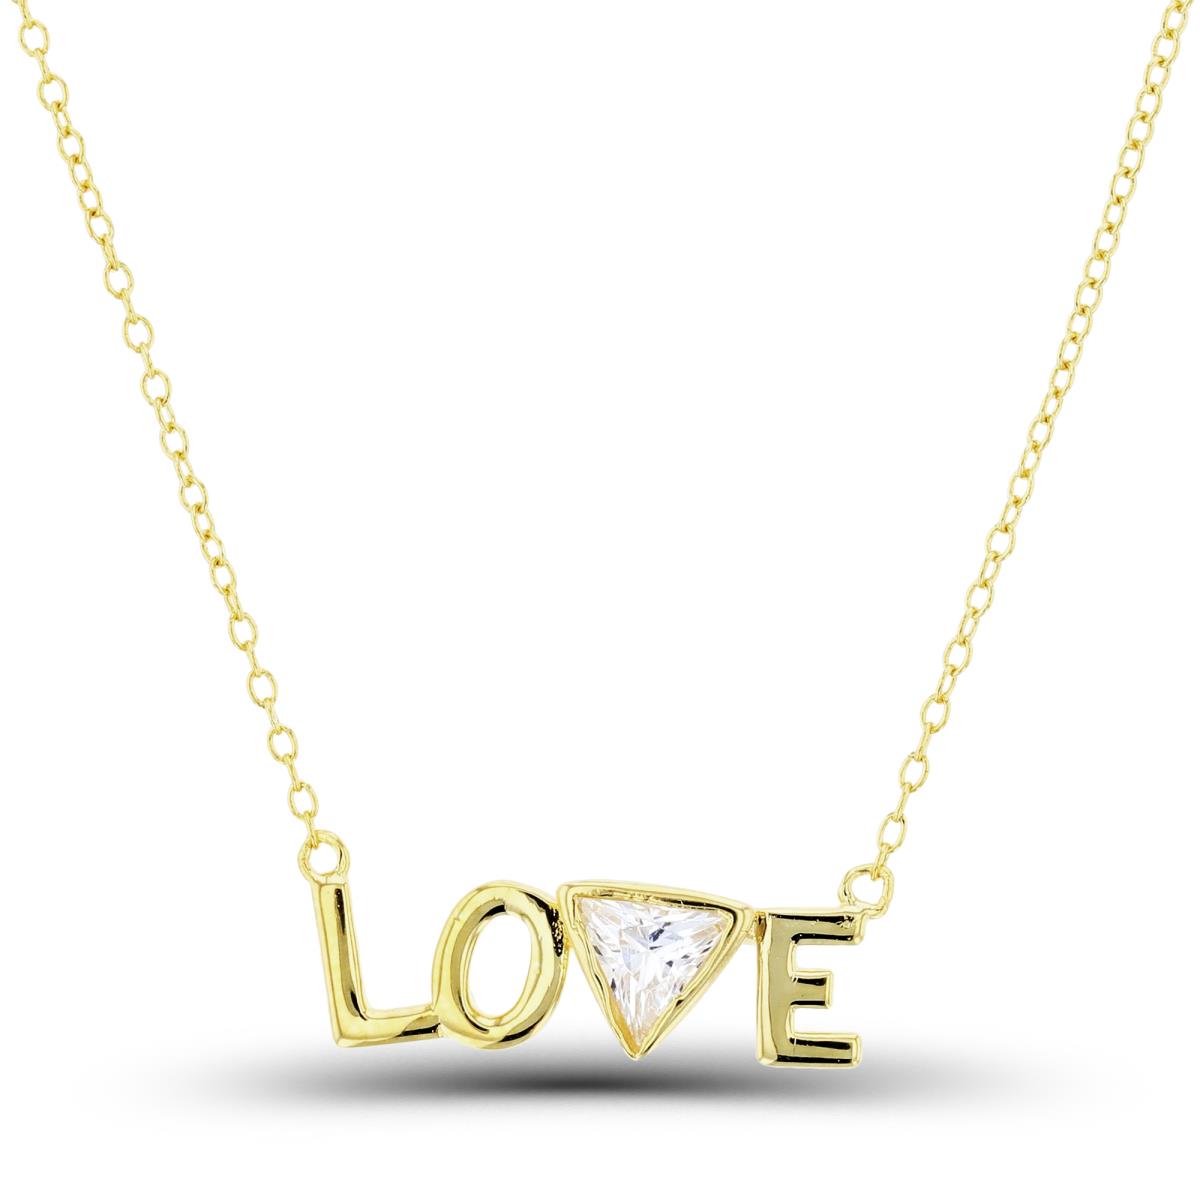 Sterling Silver+1Micron Yellow Gold Bezel 5mm Trill White CZ "LOVE" 16+2"Necklace